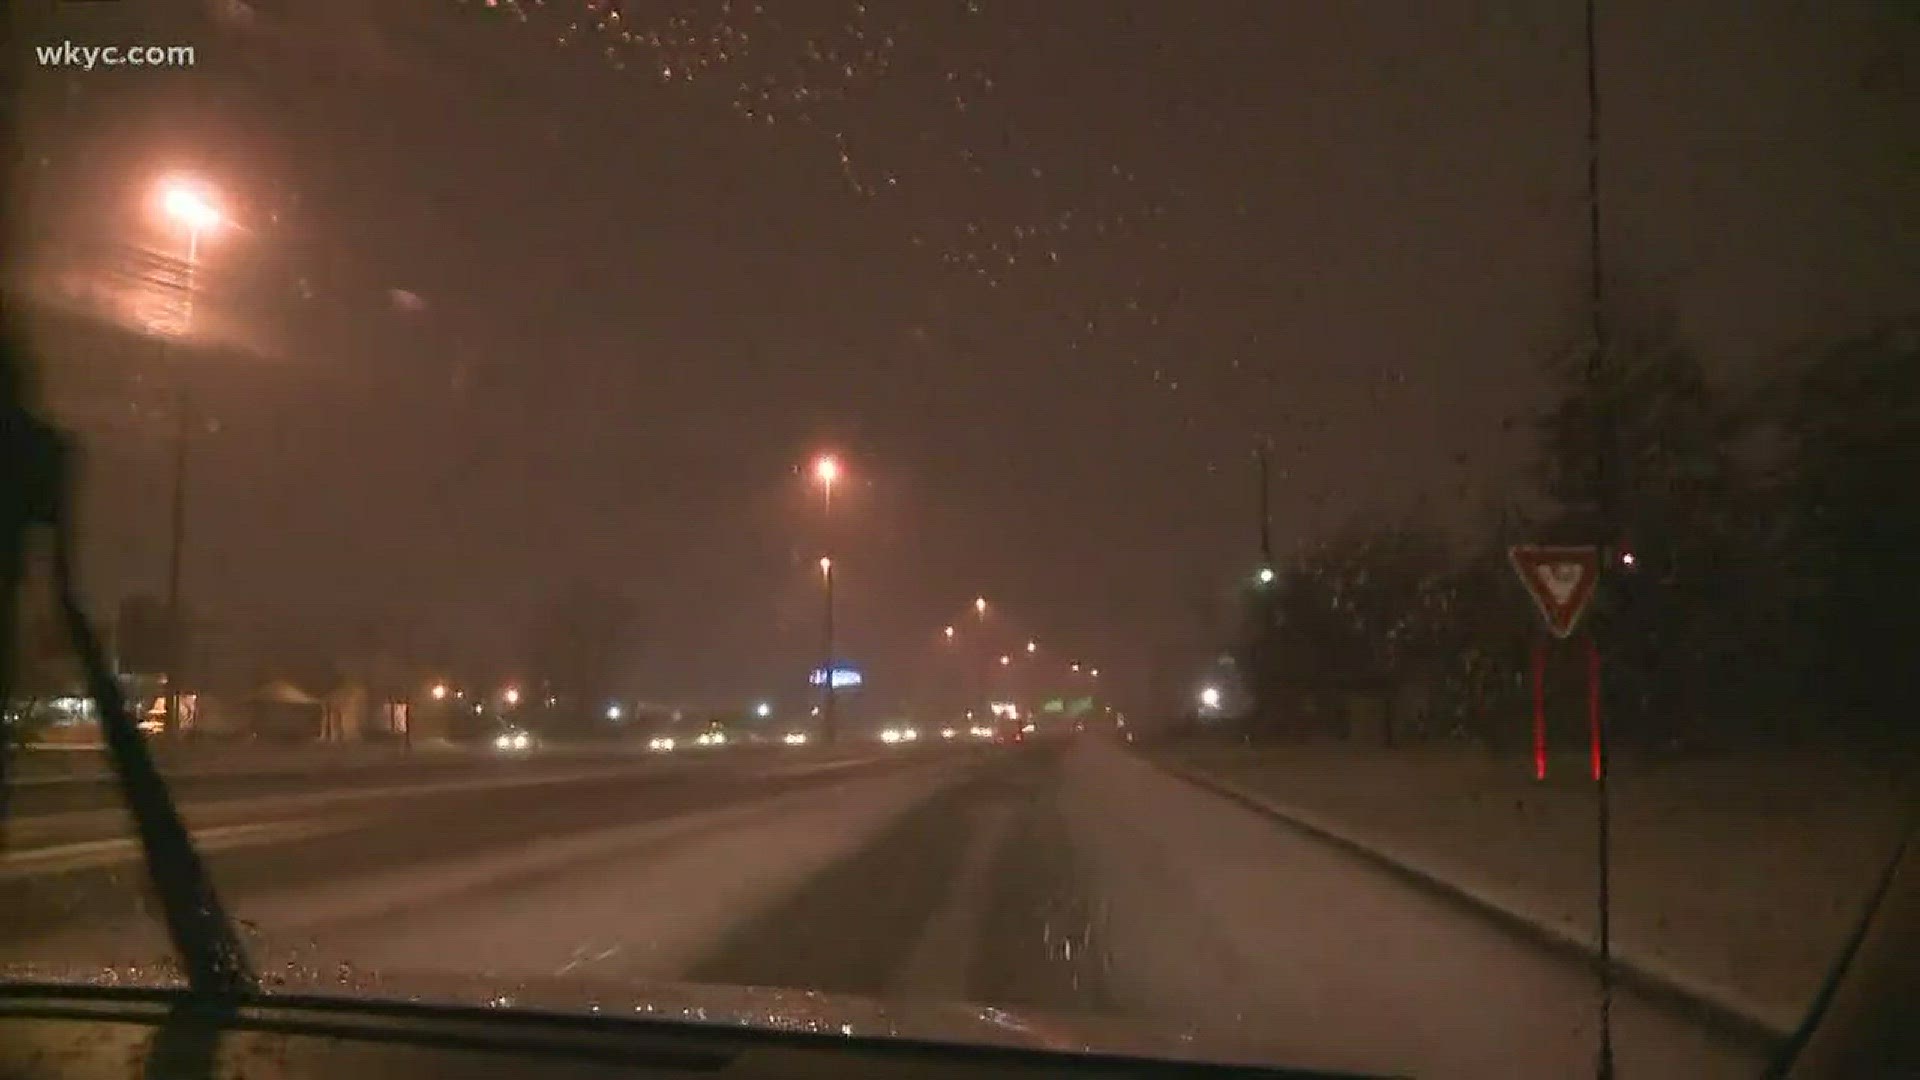 Here's a look at the snowy conditions on Cleveland's west side along I-90.